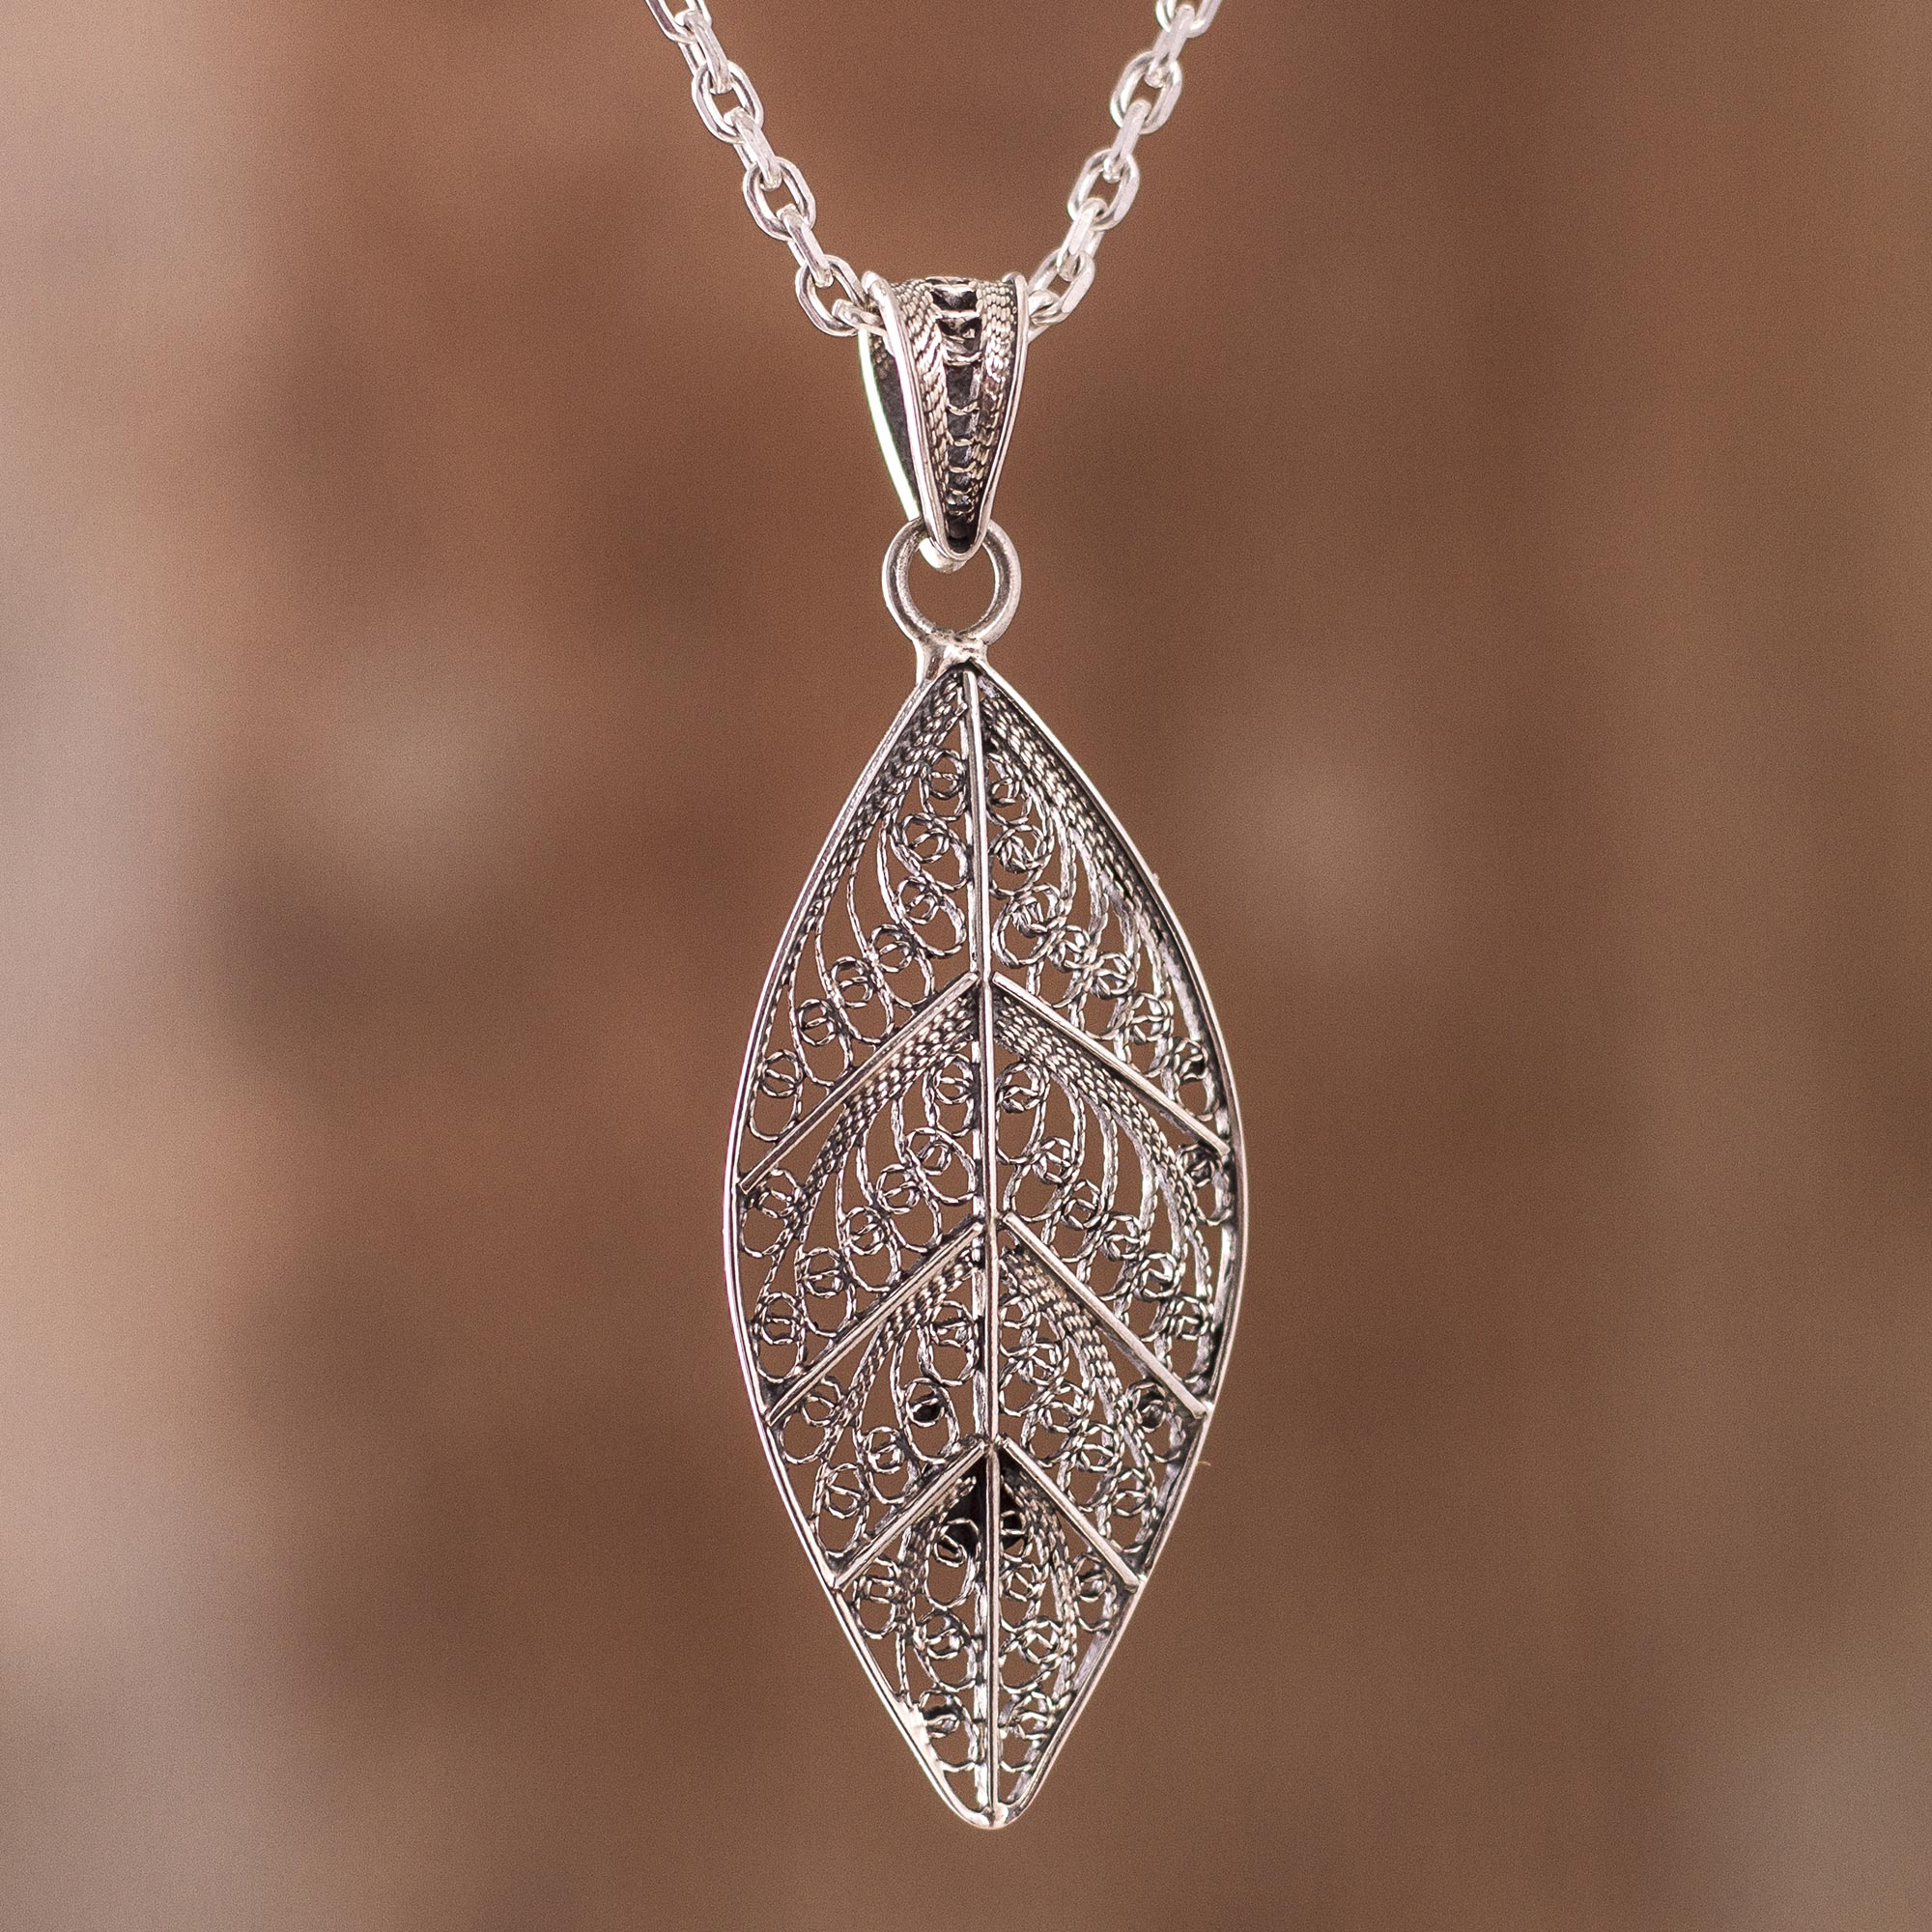 Handcrafted Sterling Silver Filigree Leaf Necklace from Peru - Mystery ...